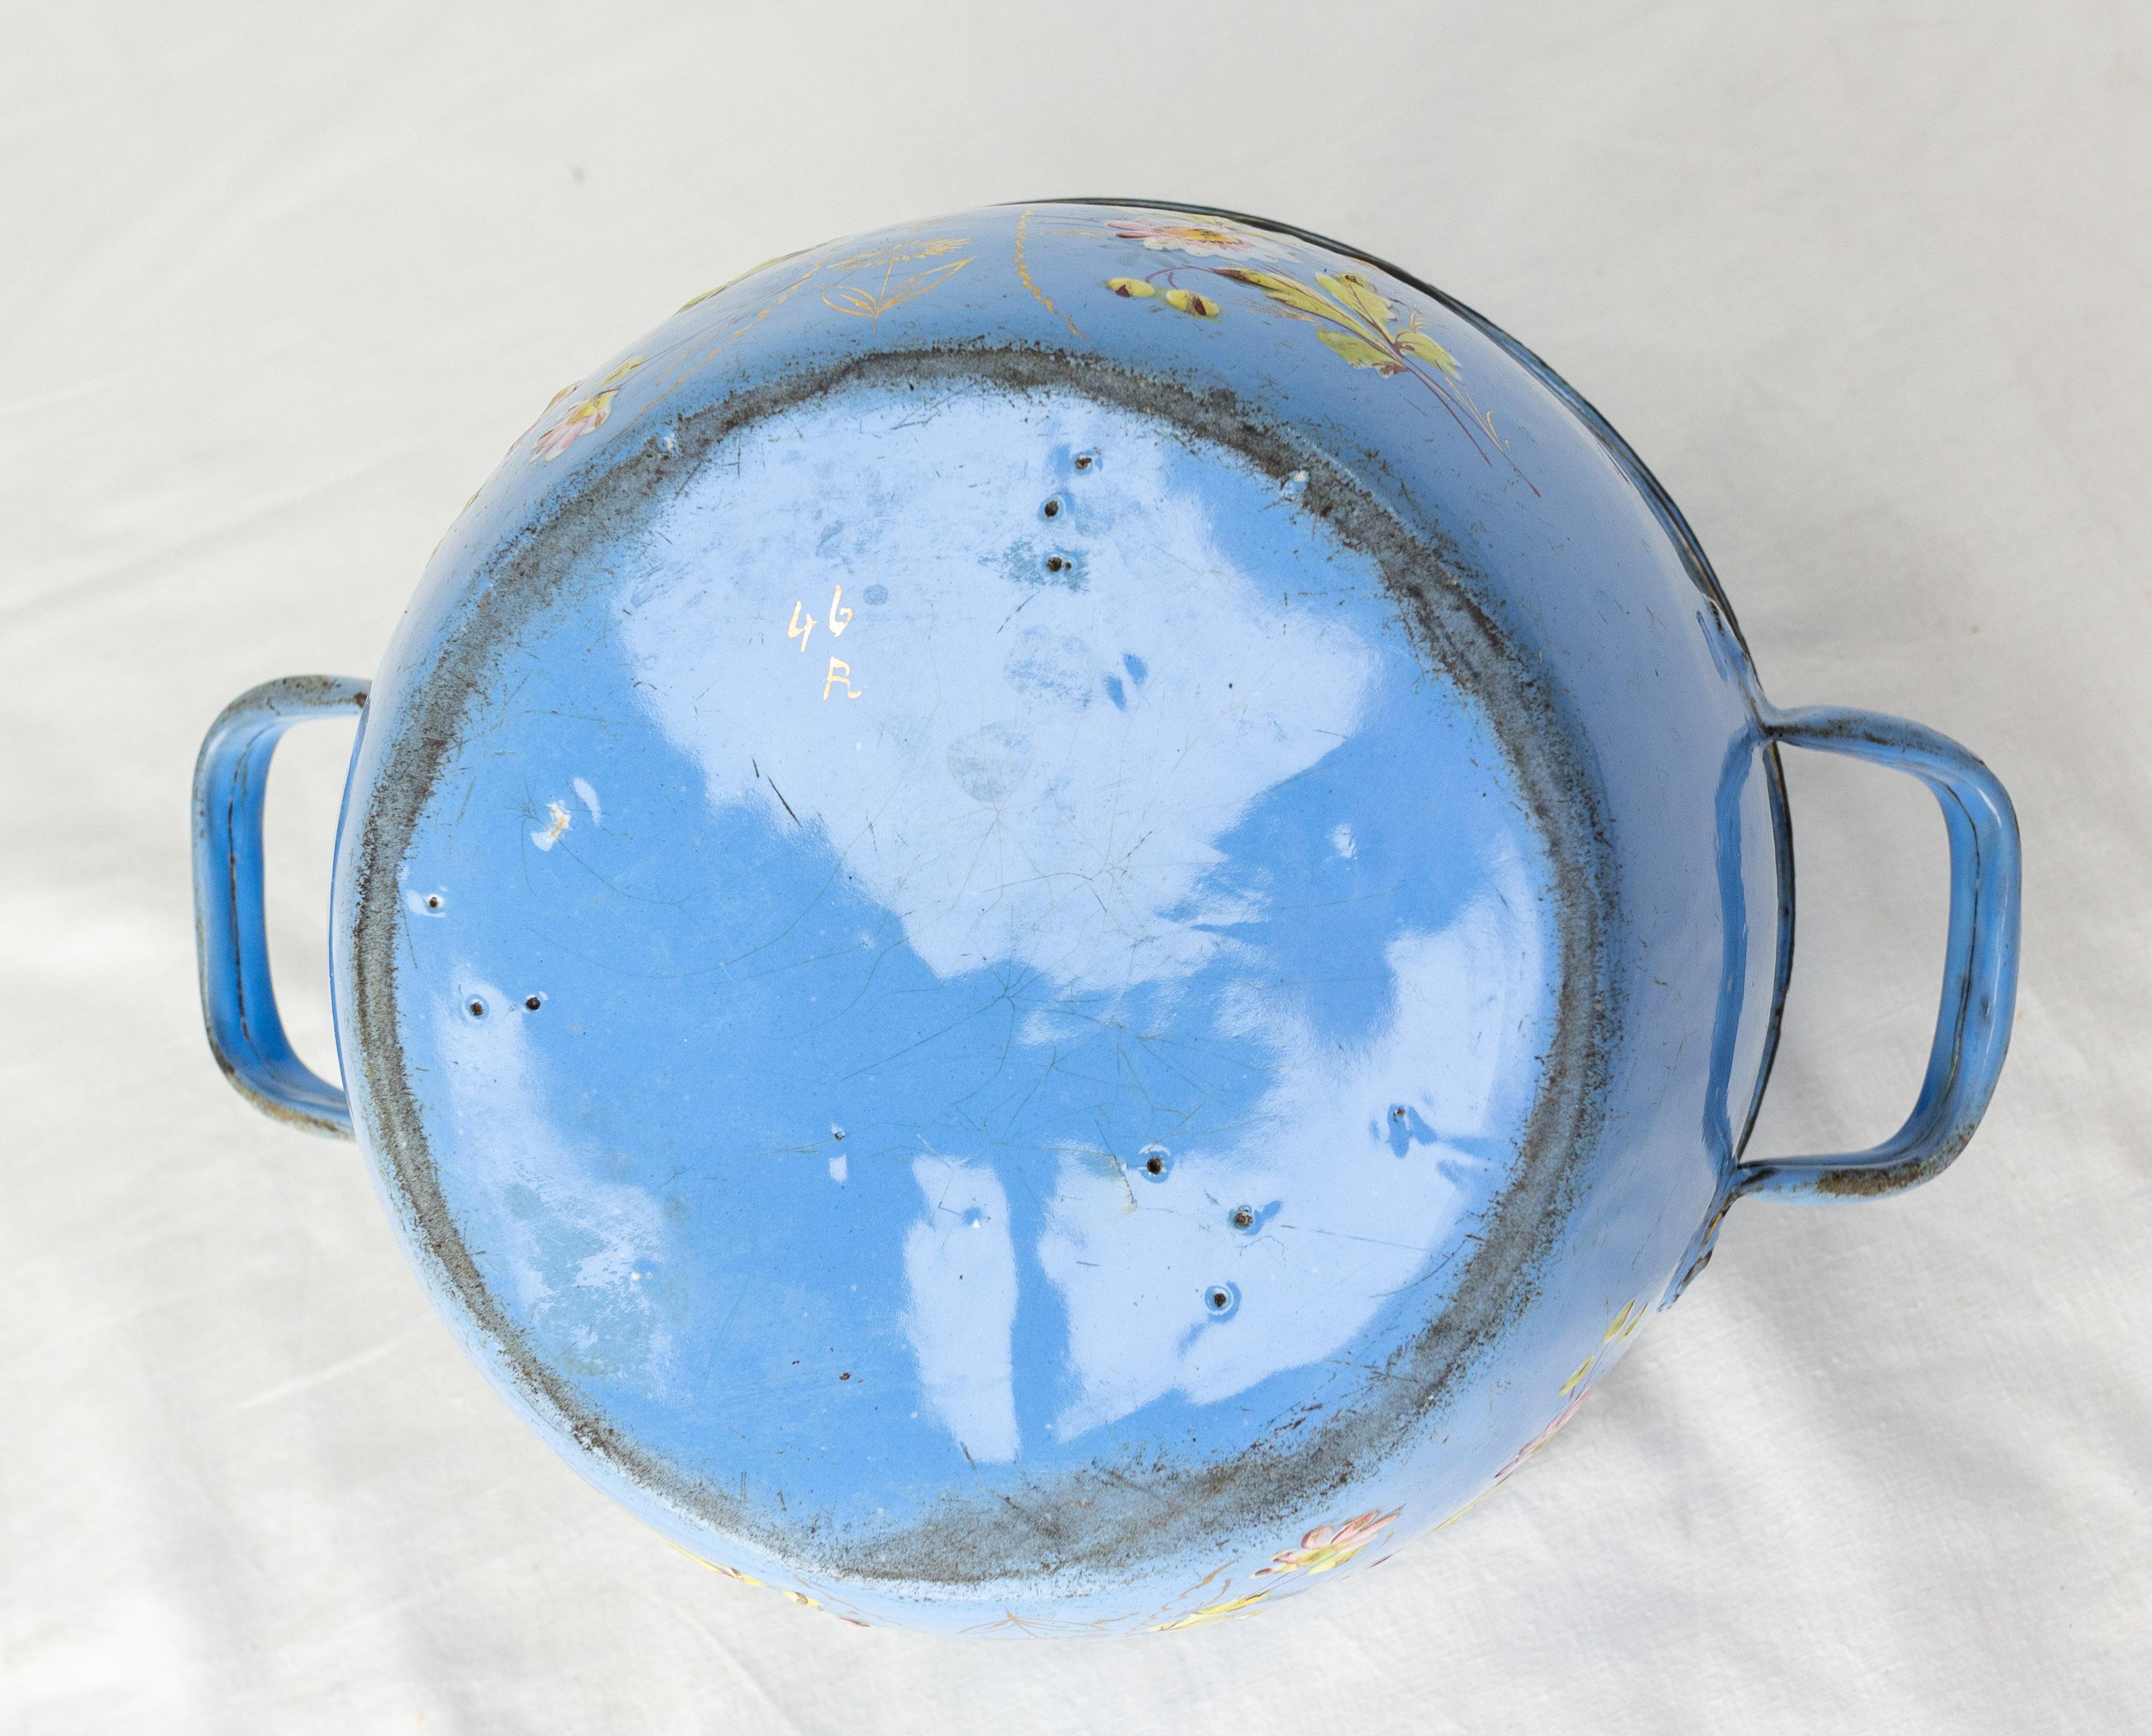 French Country Blue Soup Tureen with Floral Decoration, Enameled Iron, C. 1900 For Sale 3